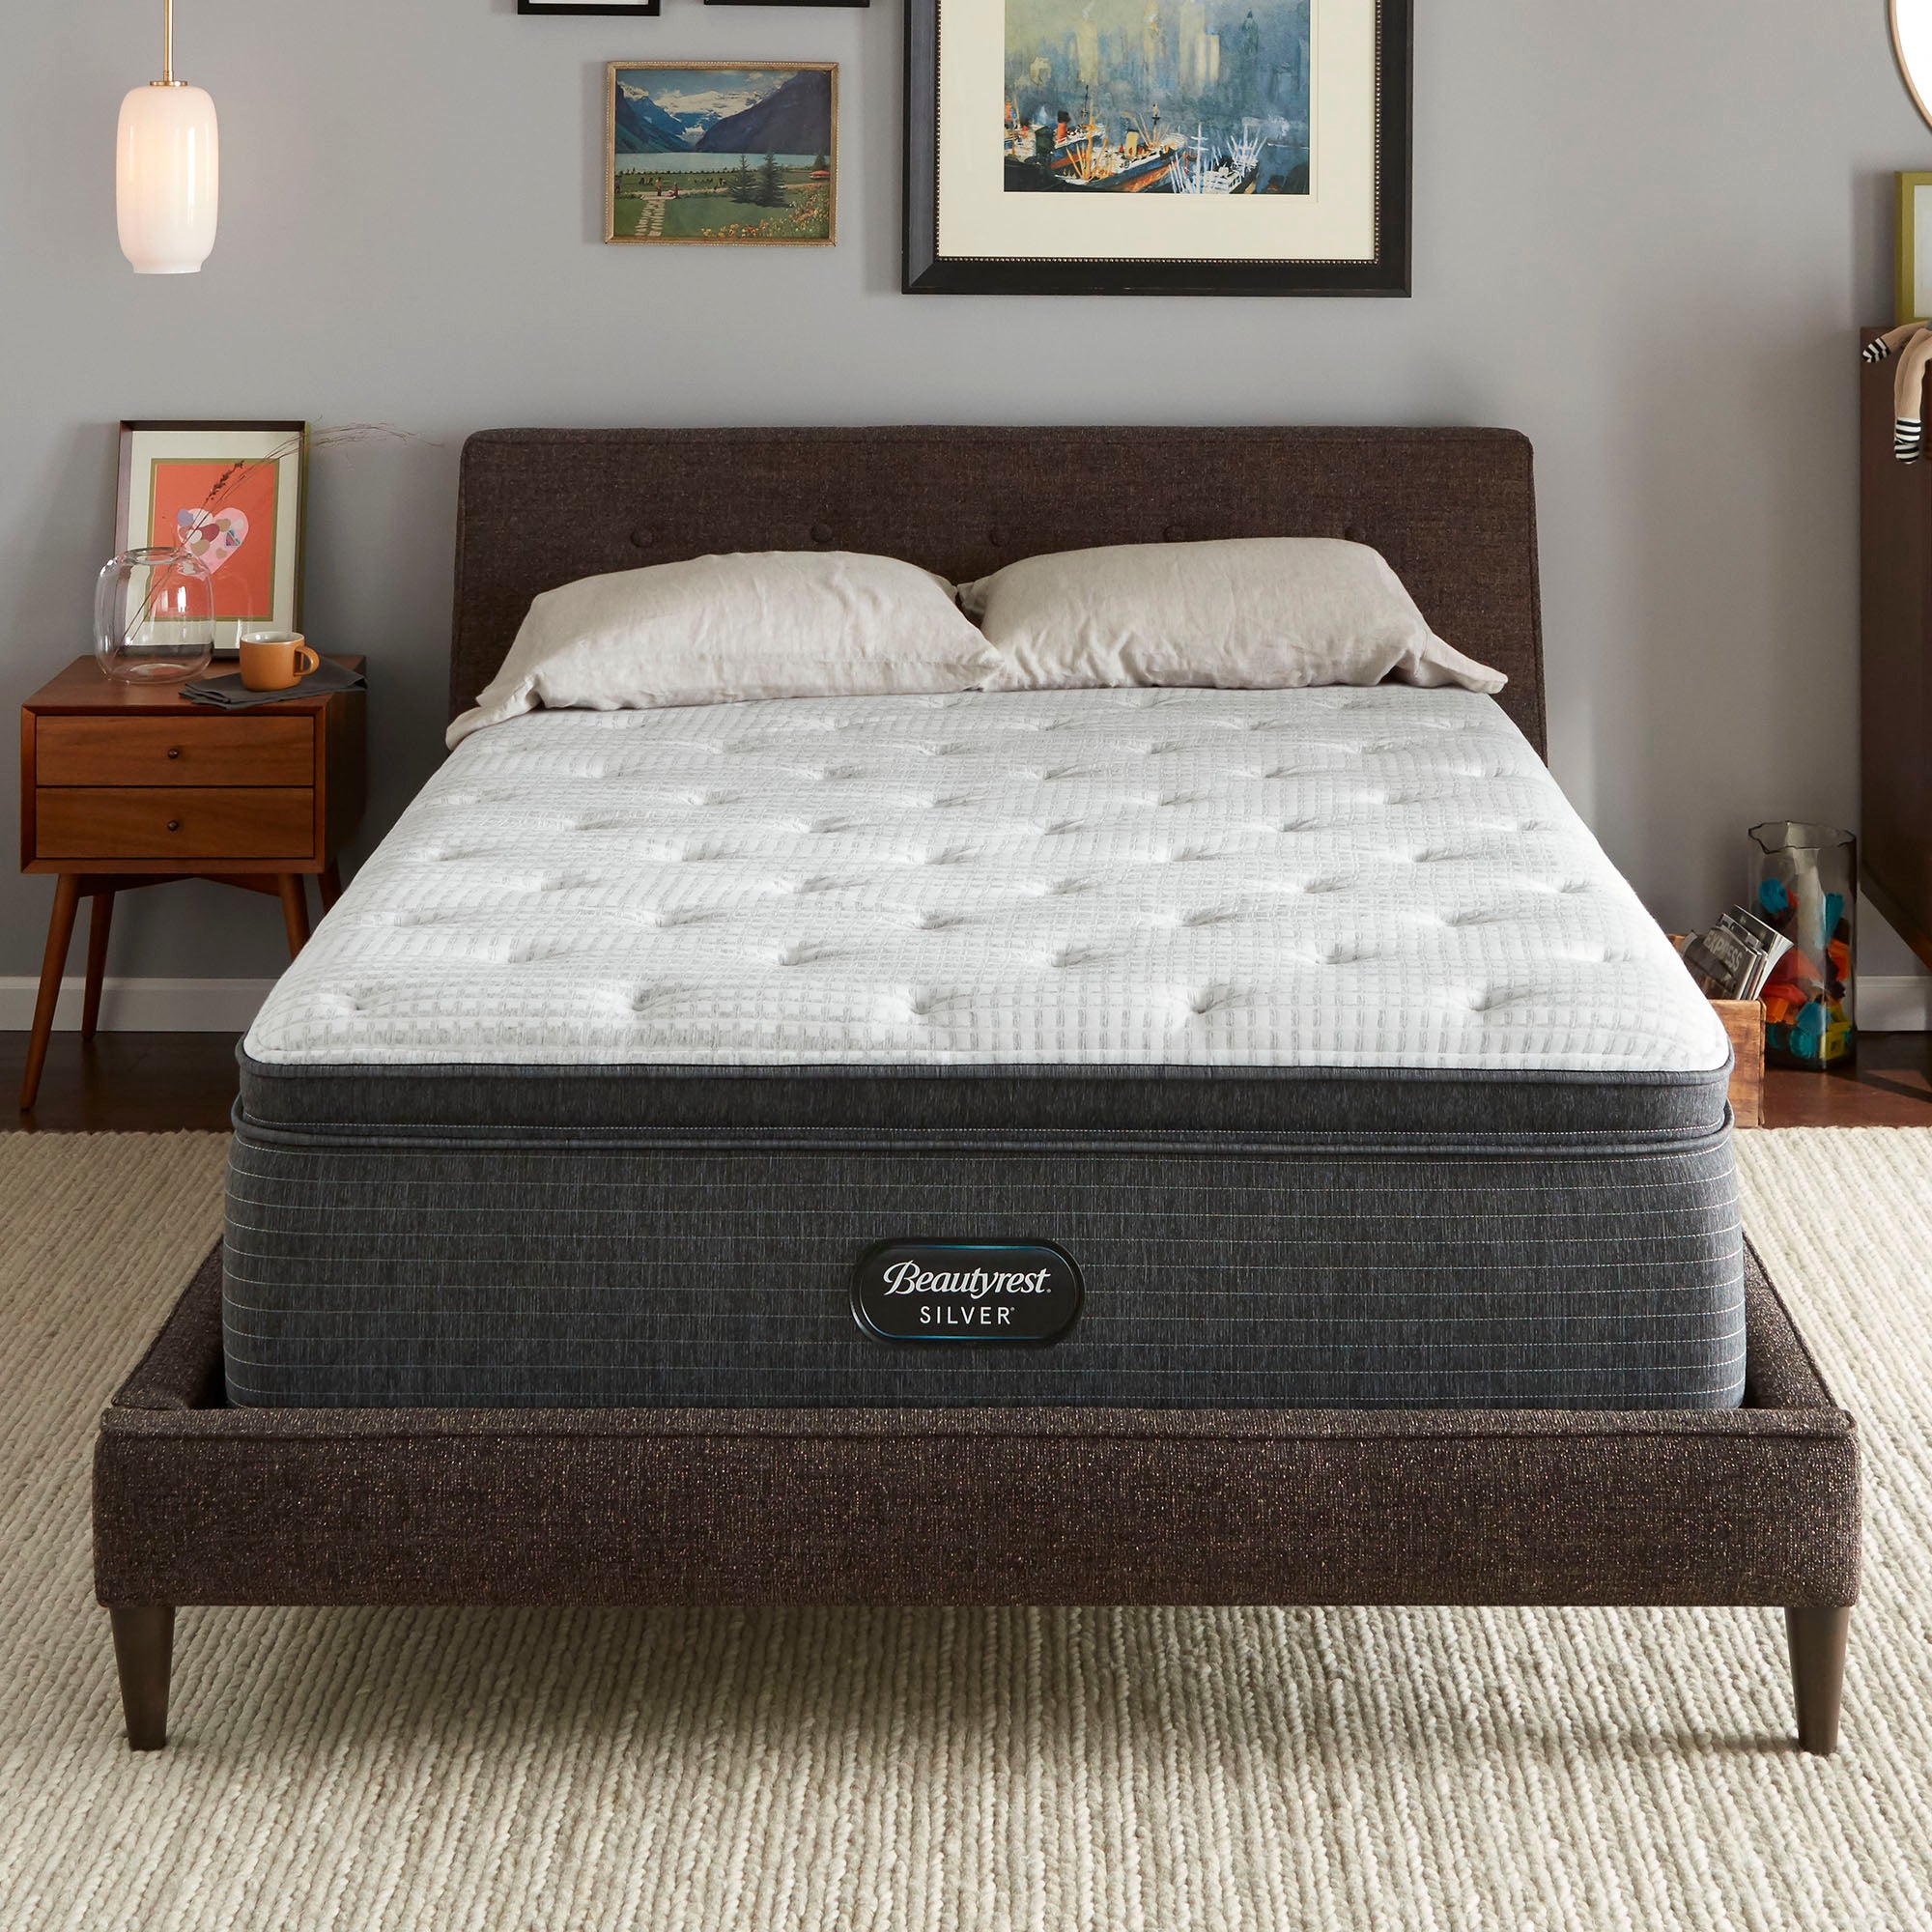 The Beautyrest Silver BRS900-C Plush Pillow Top mattress in a bedroom on a brown bed